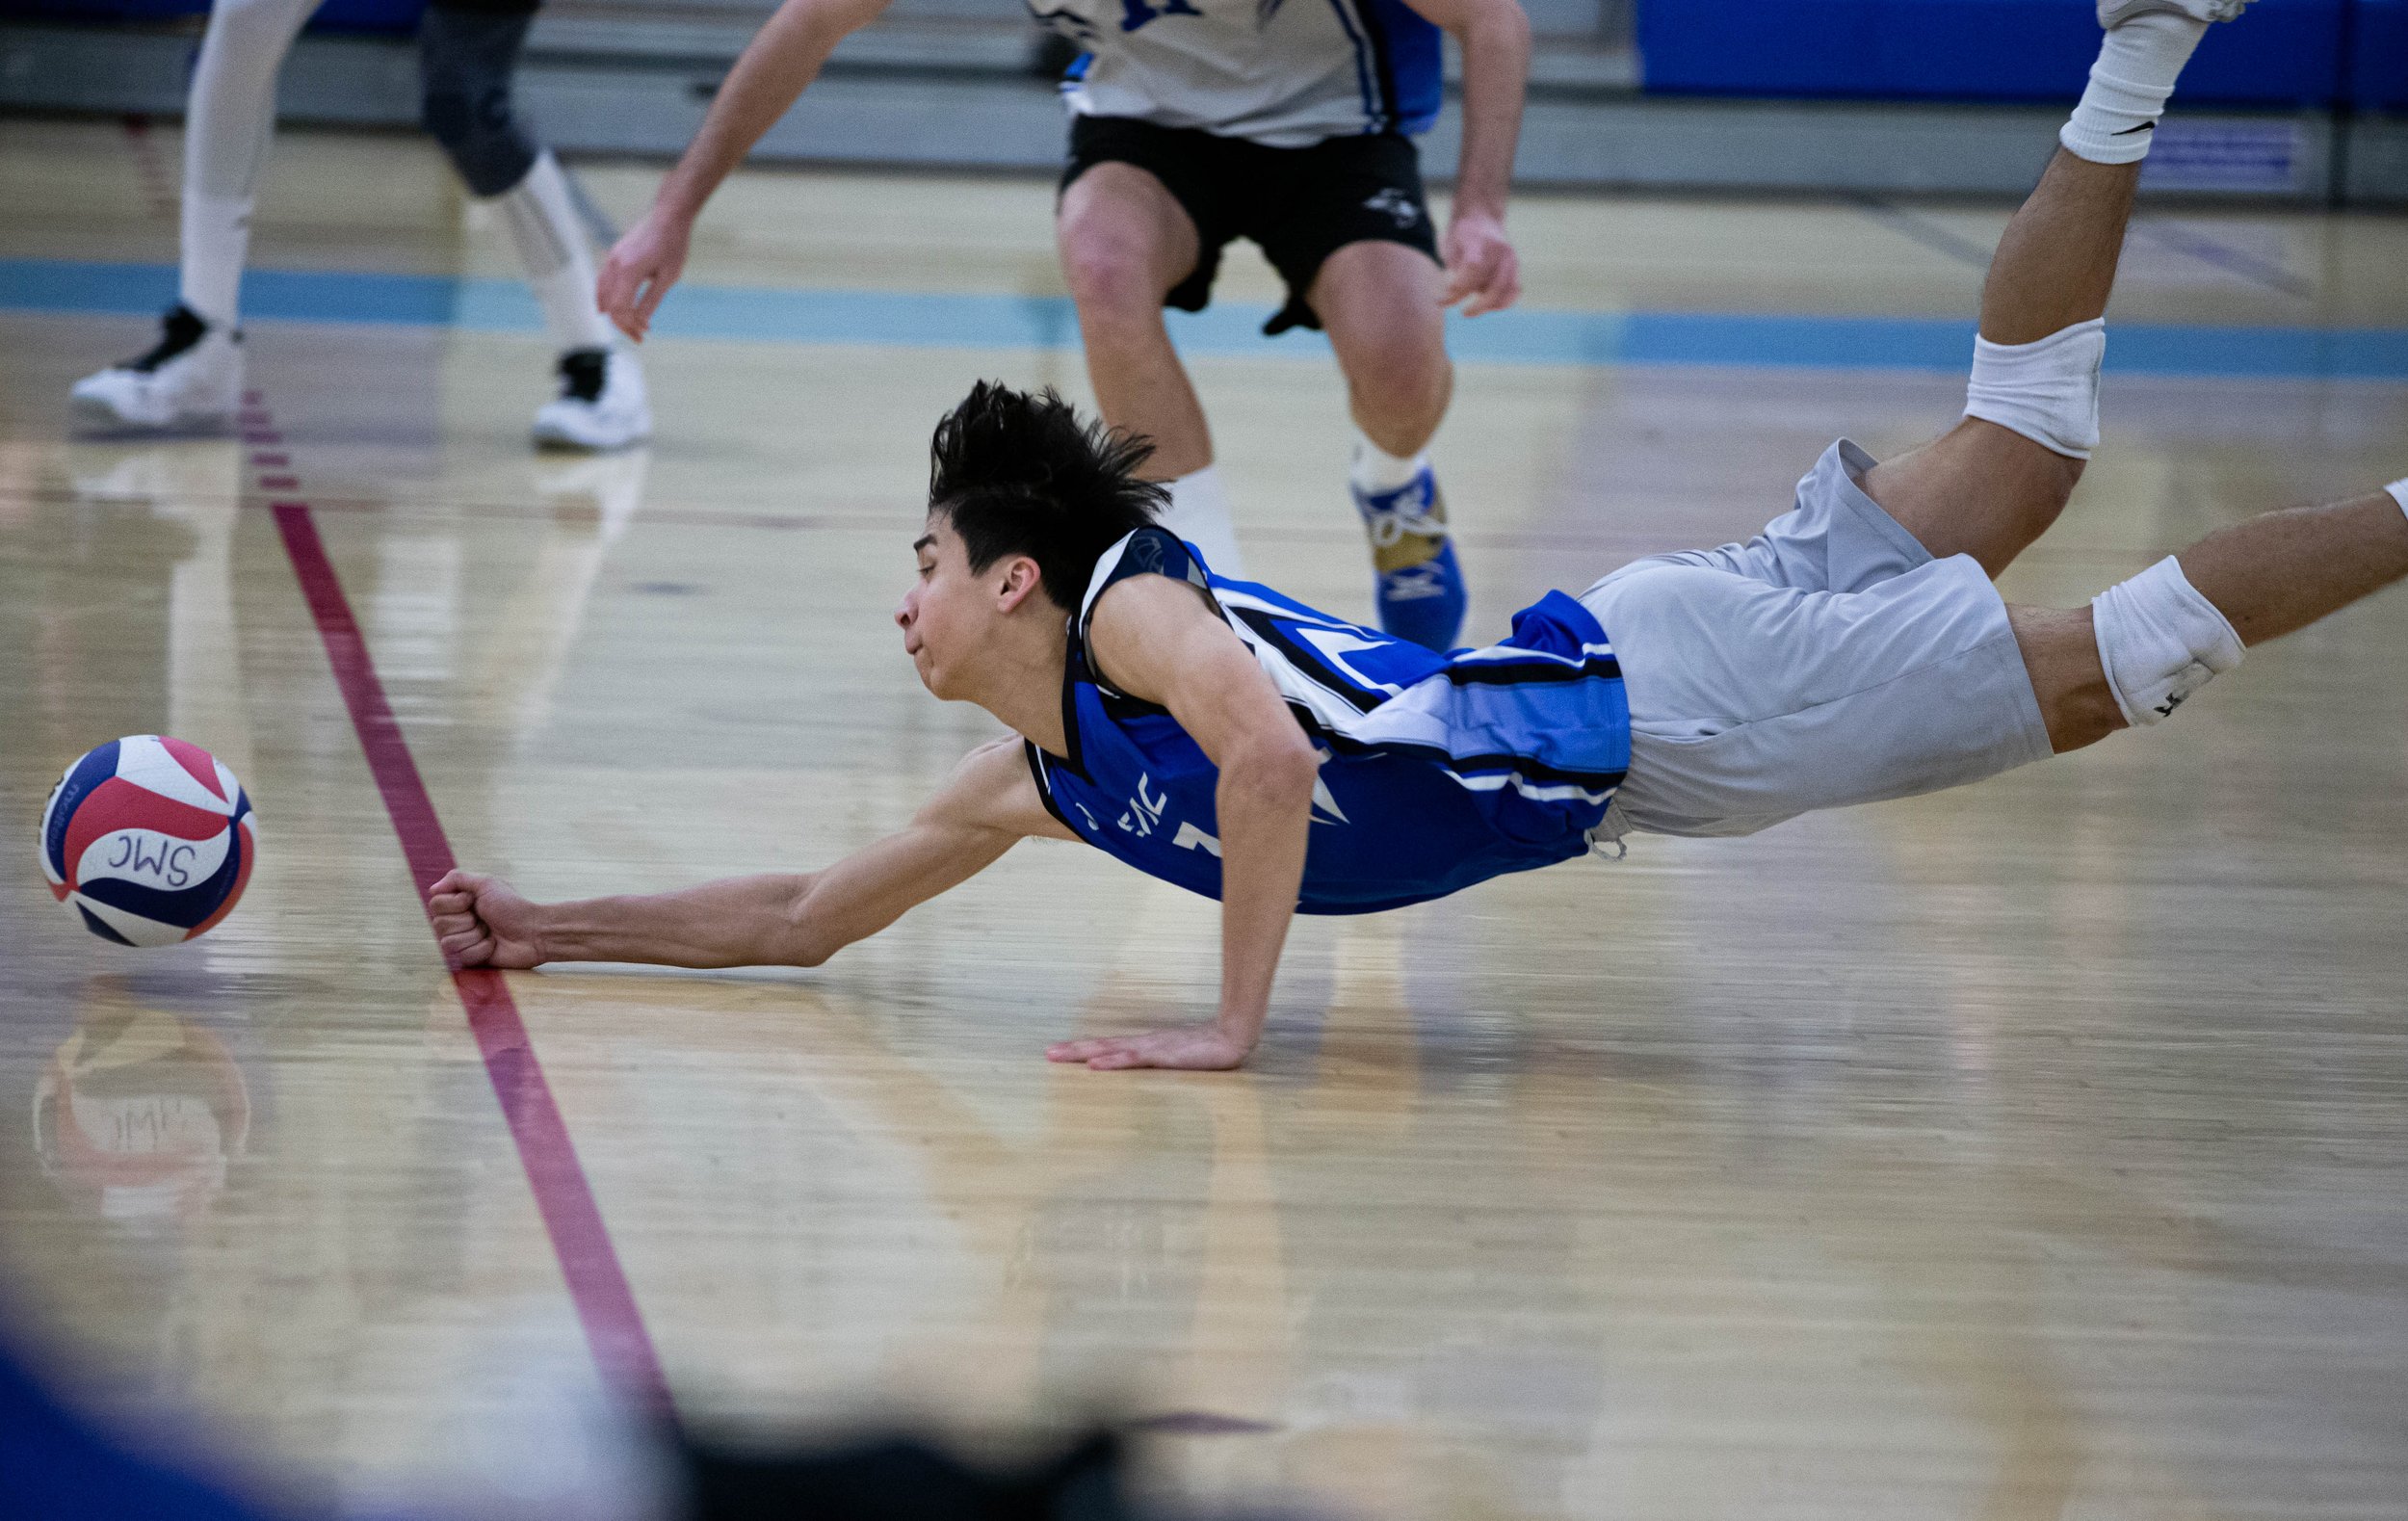  Santa Monica College Corsairs libero Javier Castillo(7) unable to recover the ball from hitting the floor after it was hit by one of the players from the Santa Barbara City College Vaqueros on Fri. March 24 in the Corsair Gym at Santa Monica, Calif.